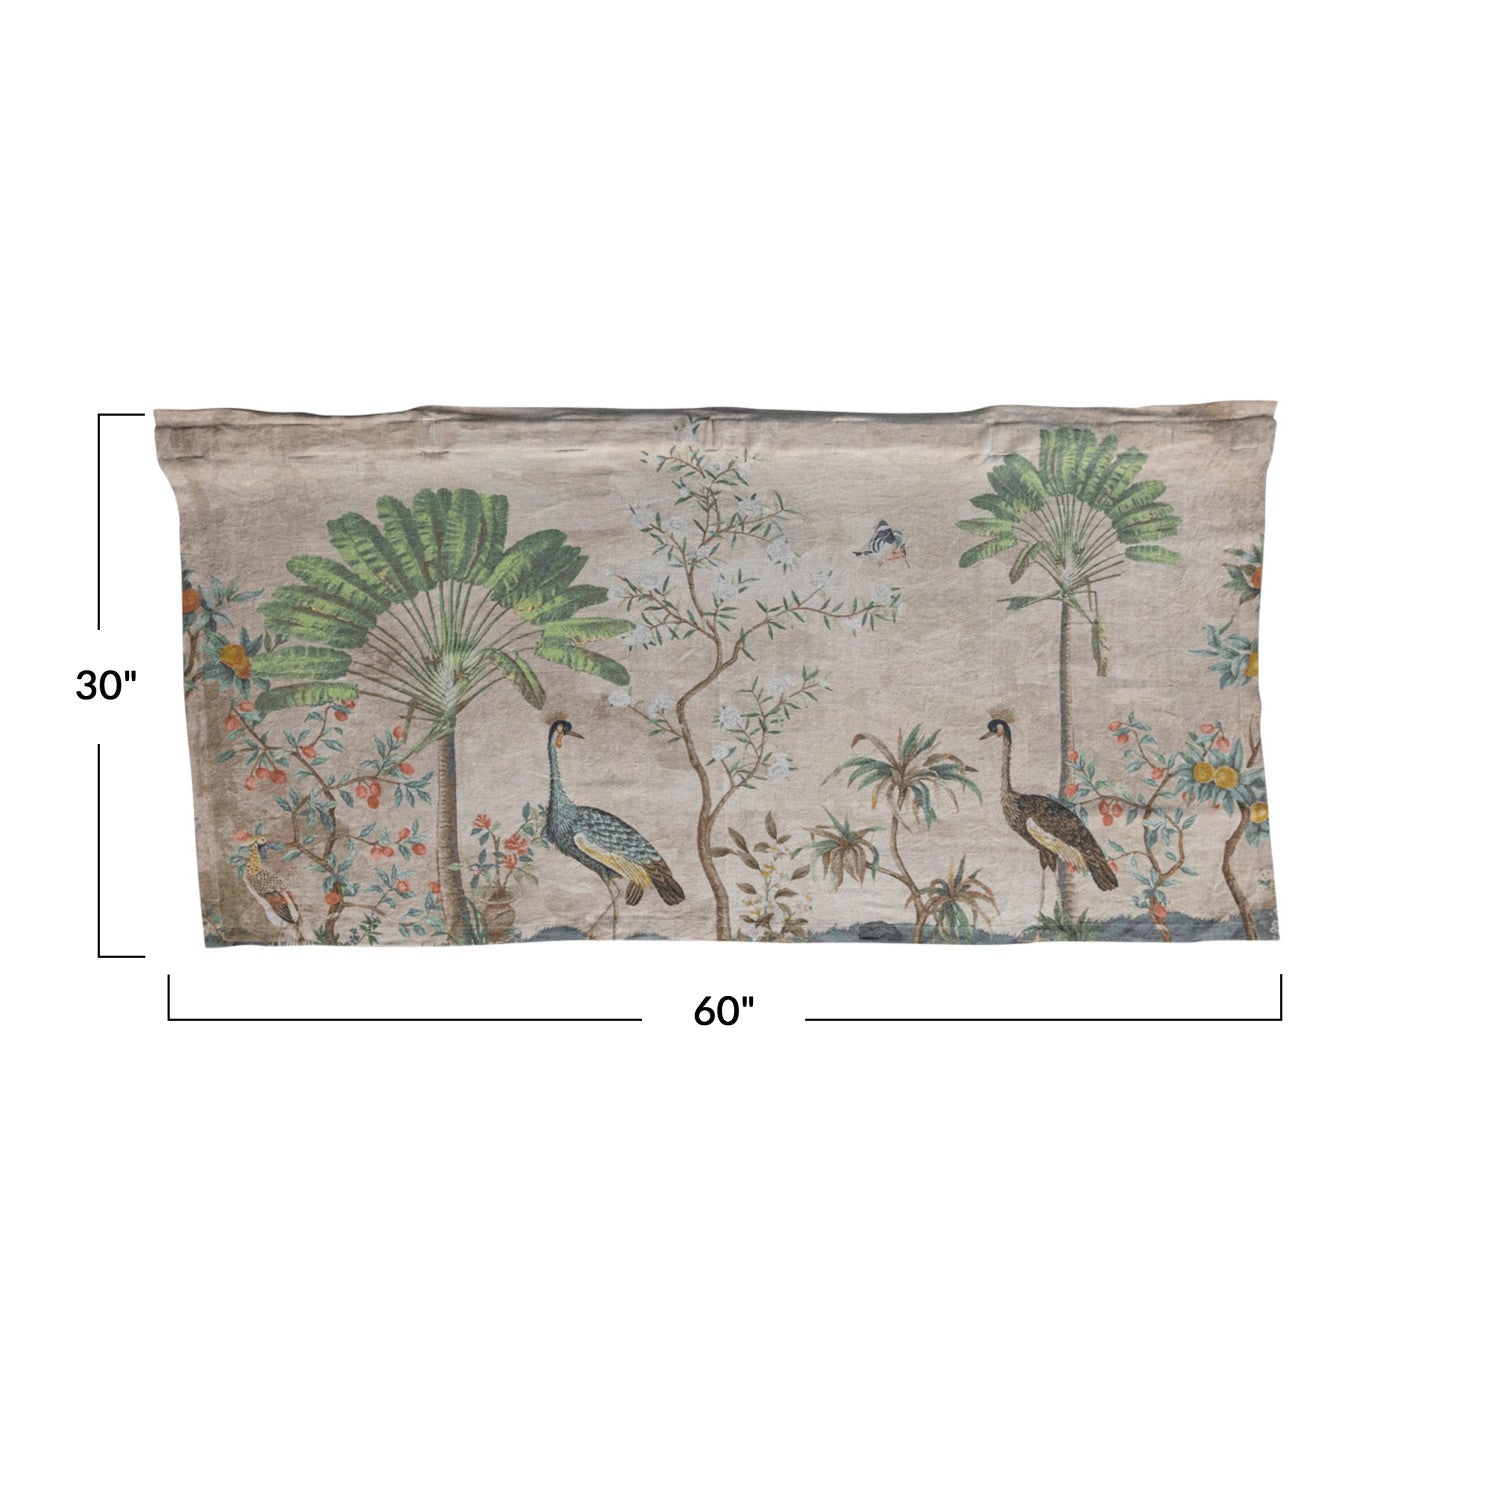 Landscape & Birds Linen Printed Wall Hanging with wood rod measures 60 inches long and 30 inches wide. 